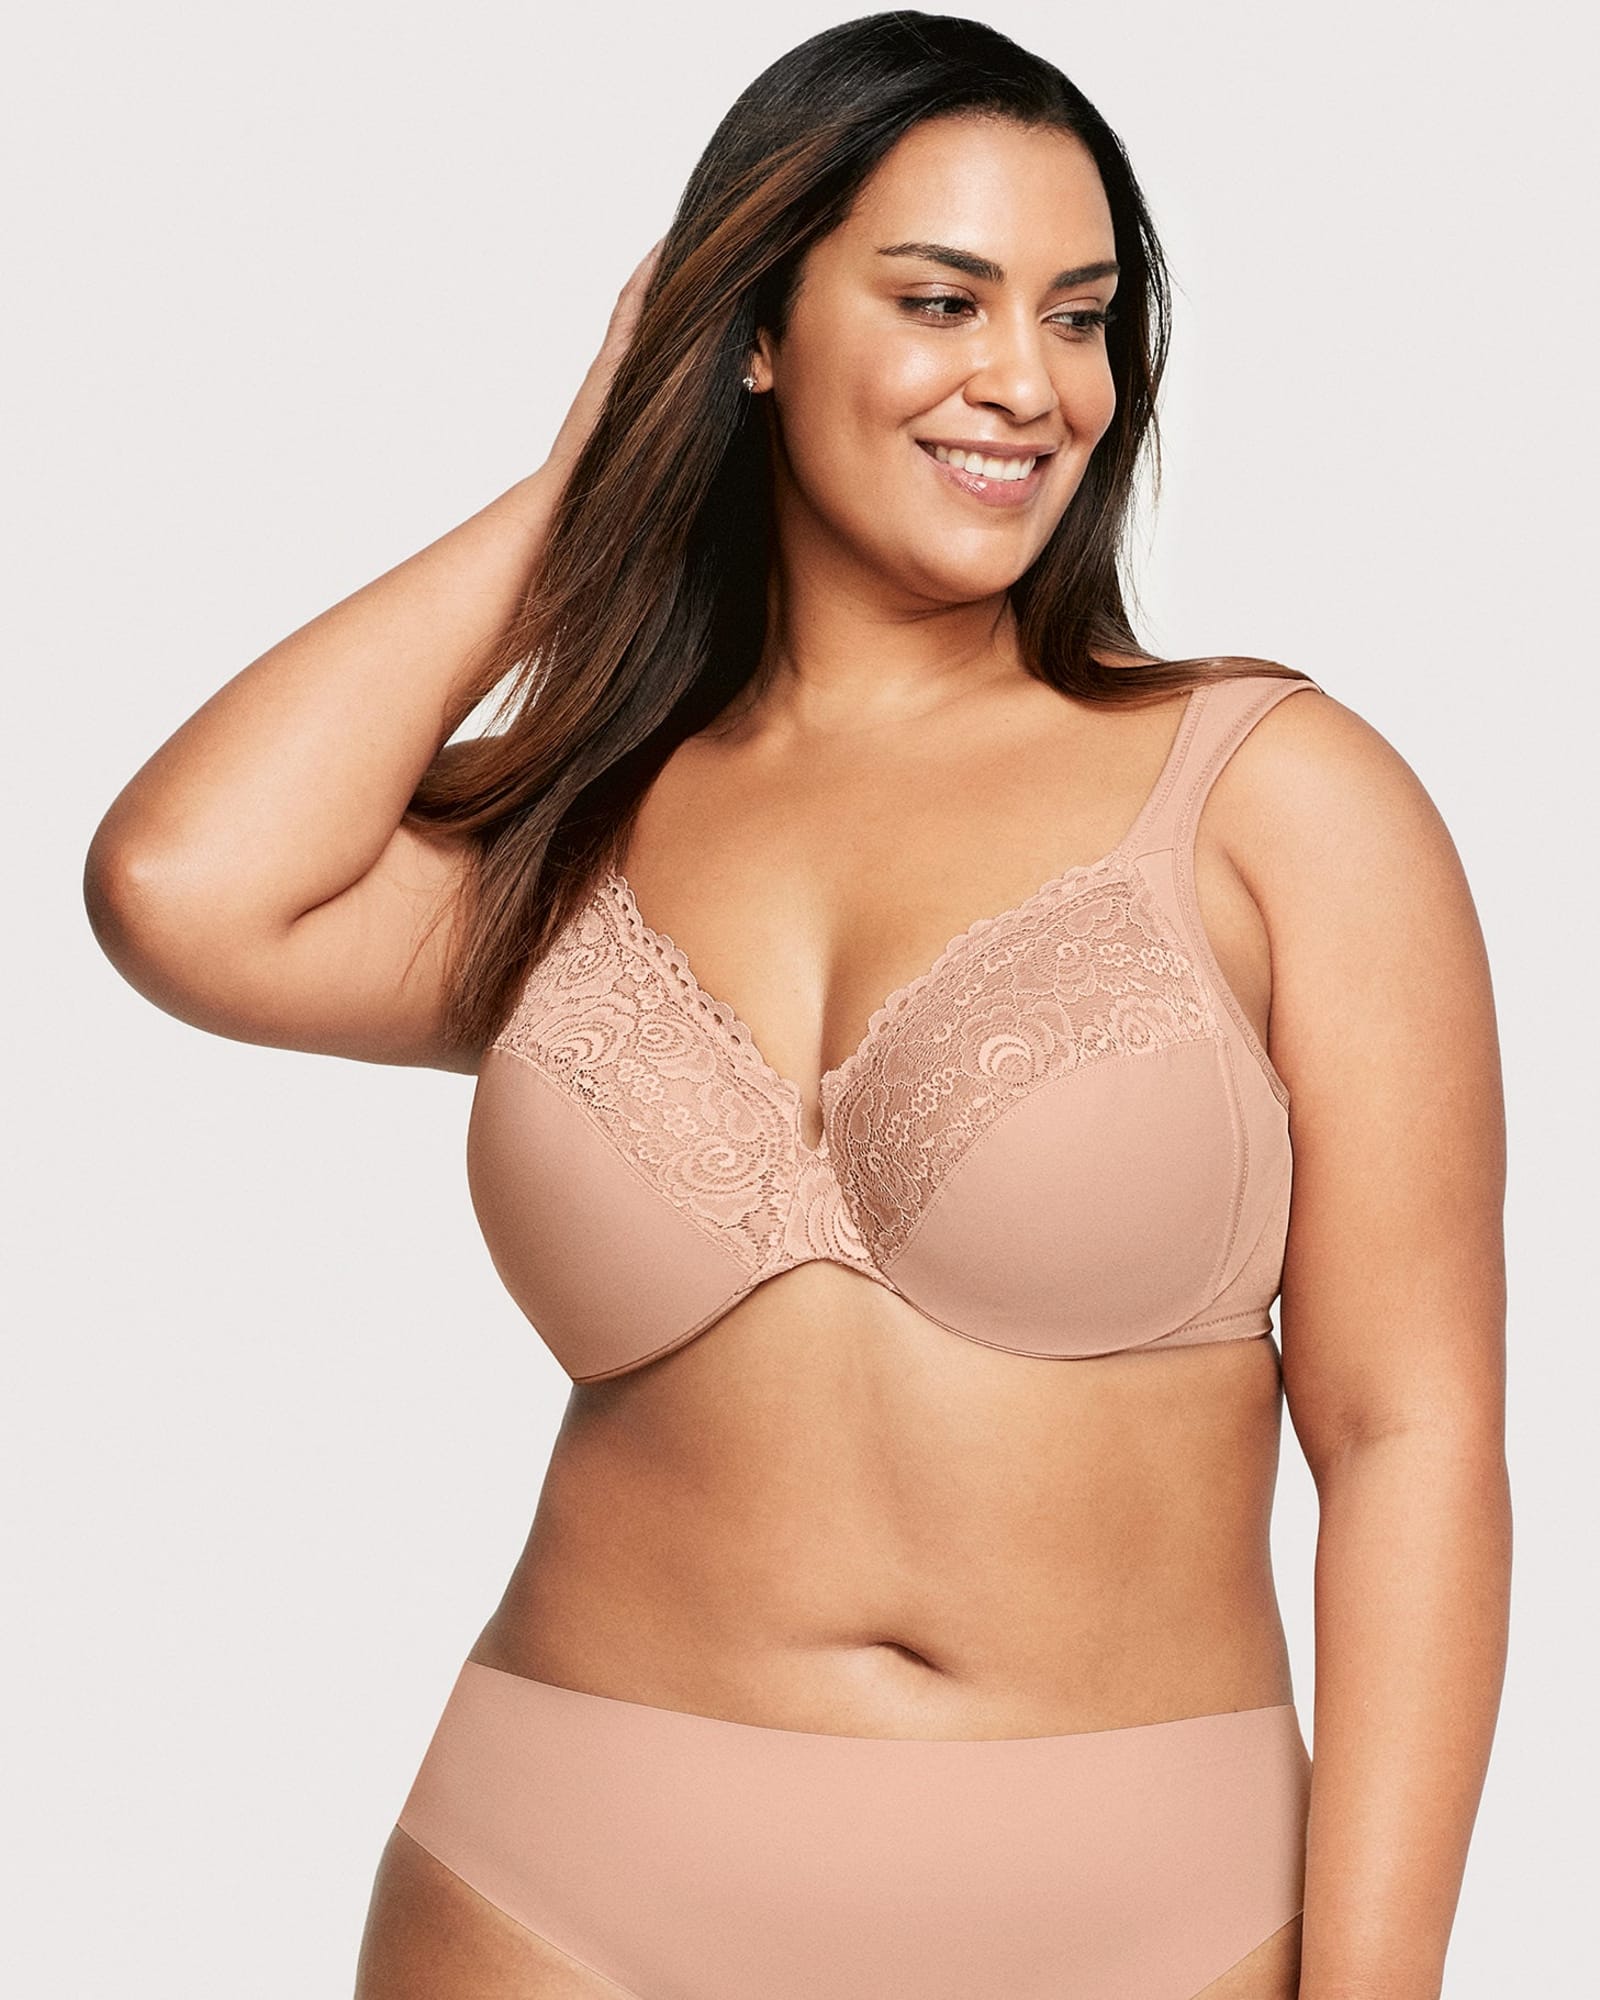 Elila Microfiber & Lace Moulded Softcup Bra in Dusty Rose - Busted Bra Shop